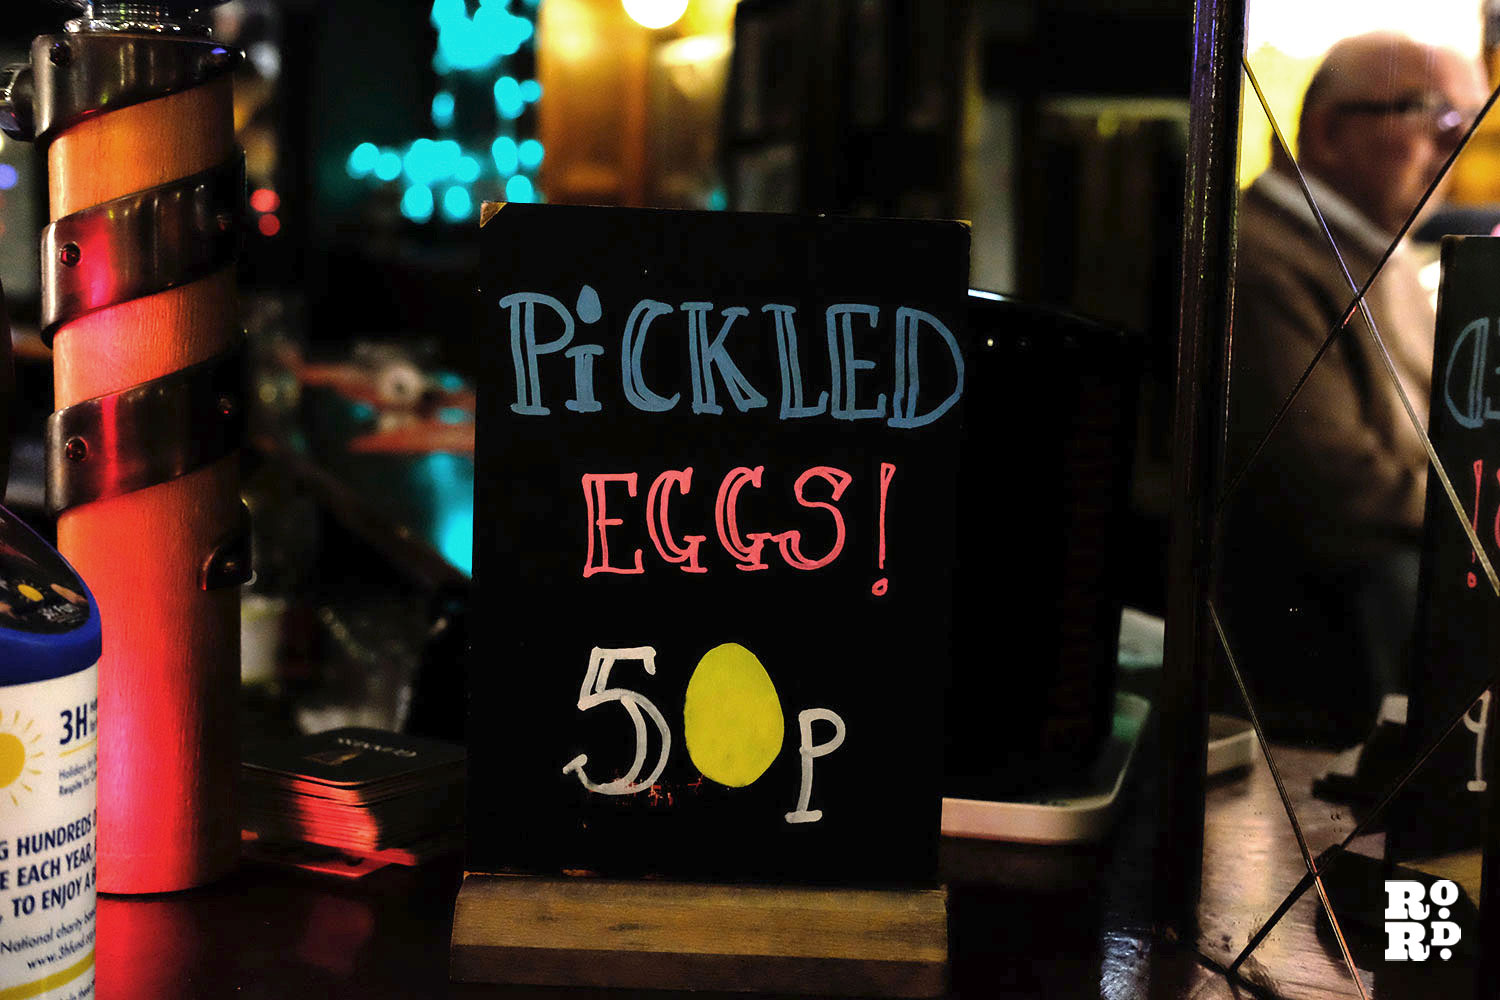 Pickled eggs at The Eleanor Arms pub